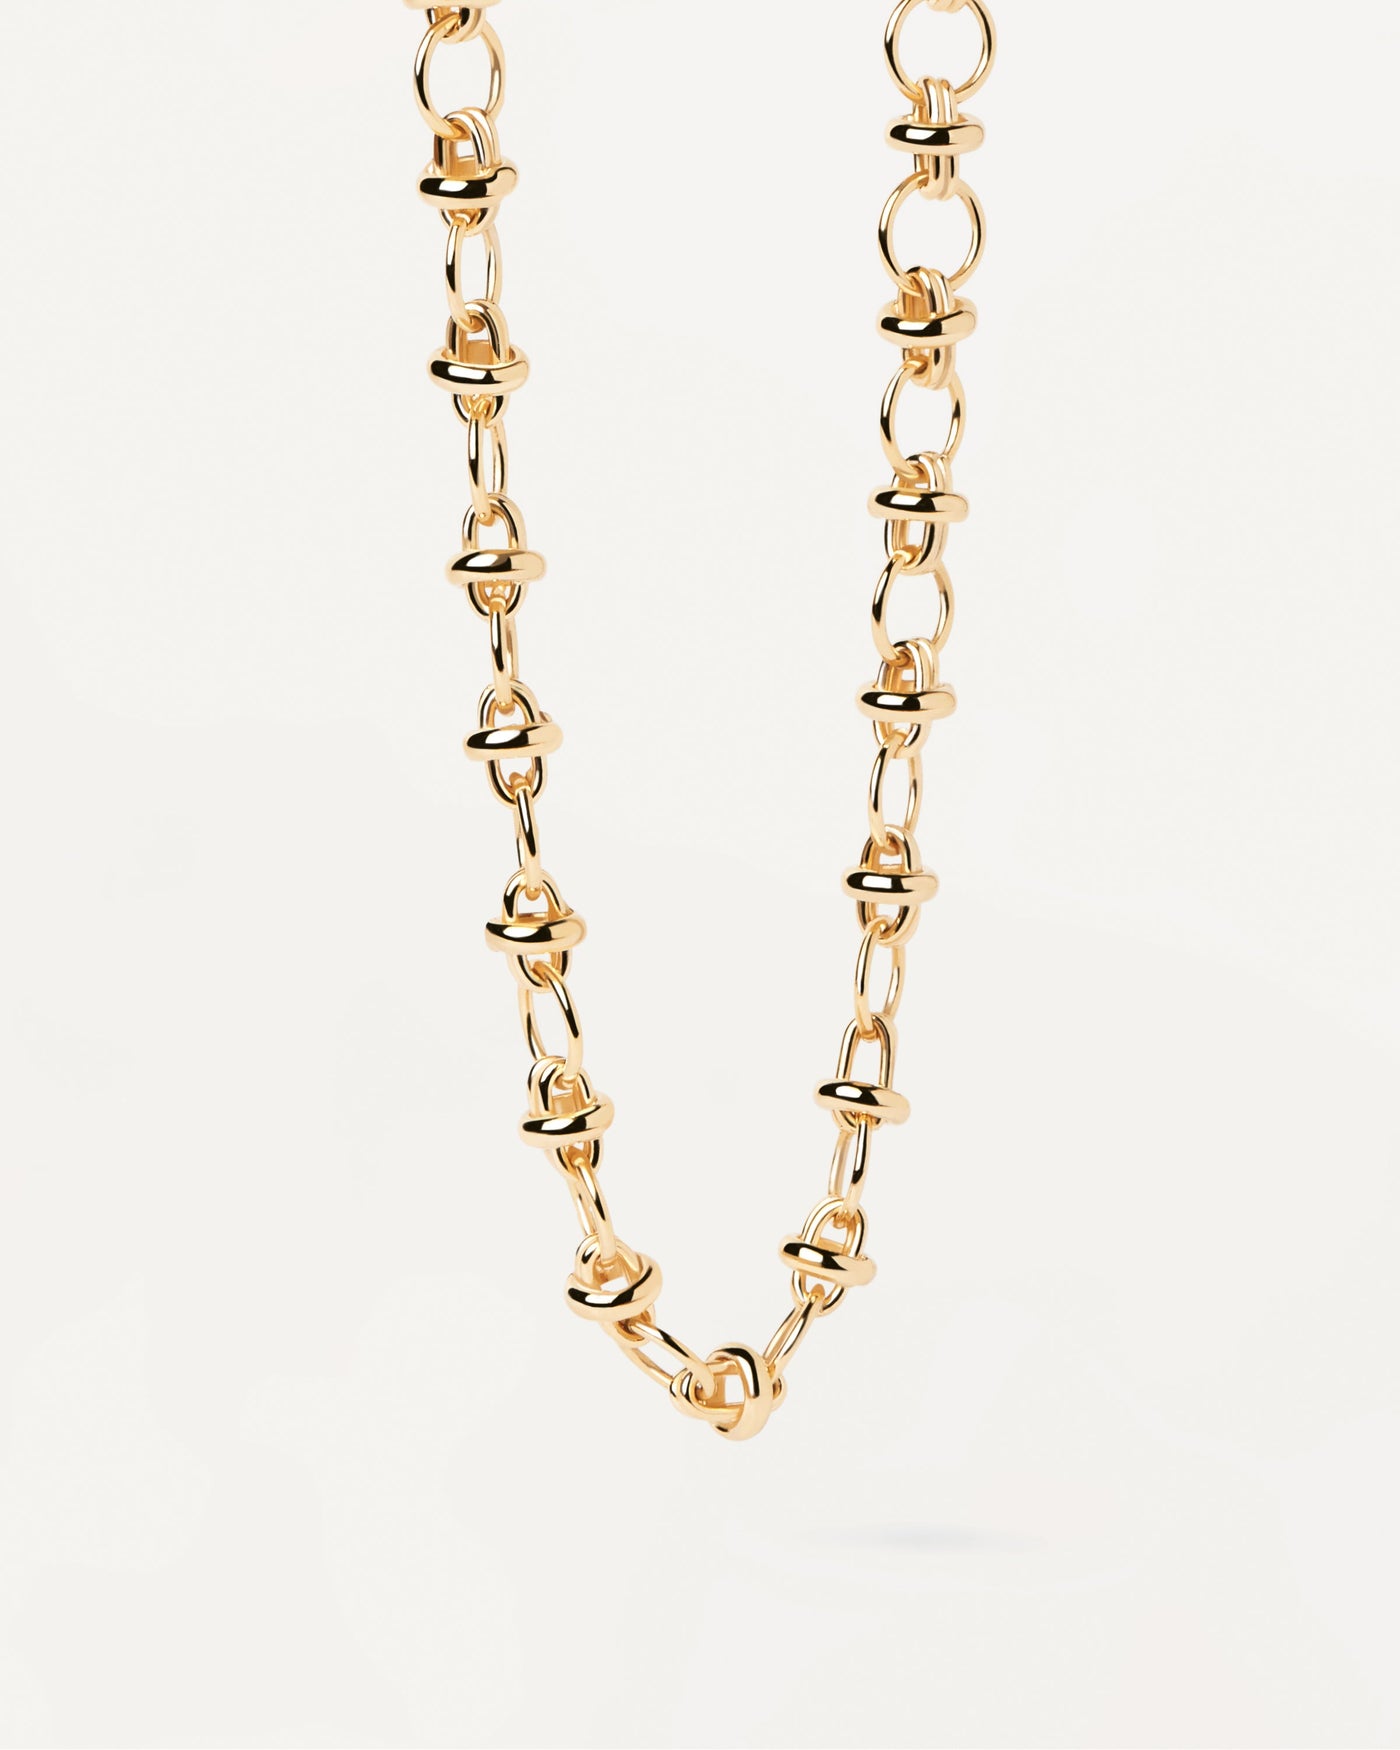 2023 Selection | Meraki Chain Necklace. Gold-plated silver chain necklace with round links. Get the latest arrival from PDPAOLA. Place your order safely and get this Best Seller. Free Shipping.